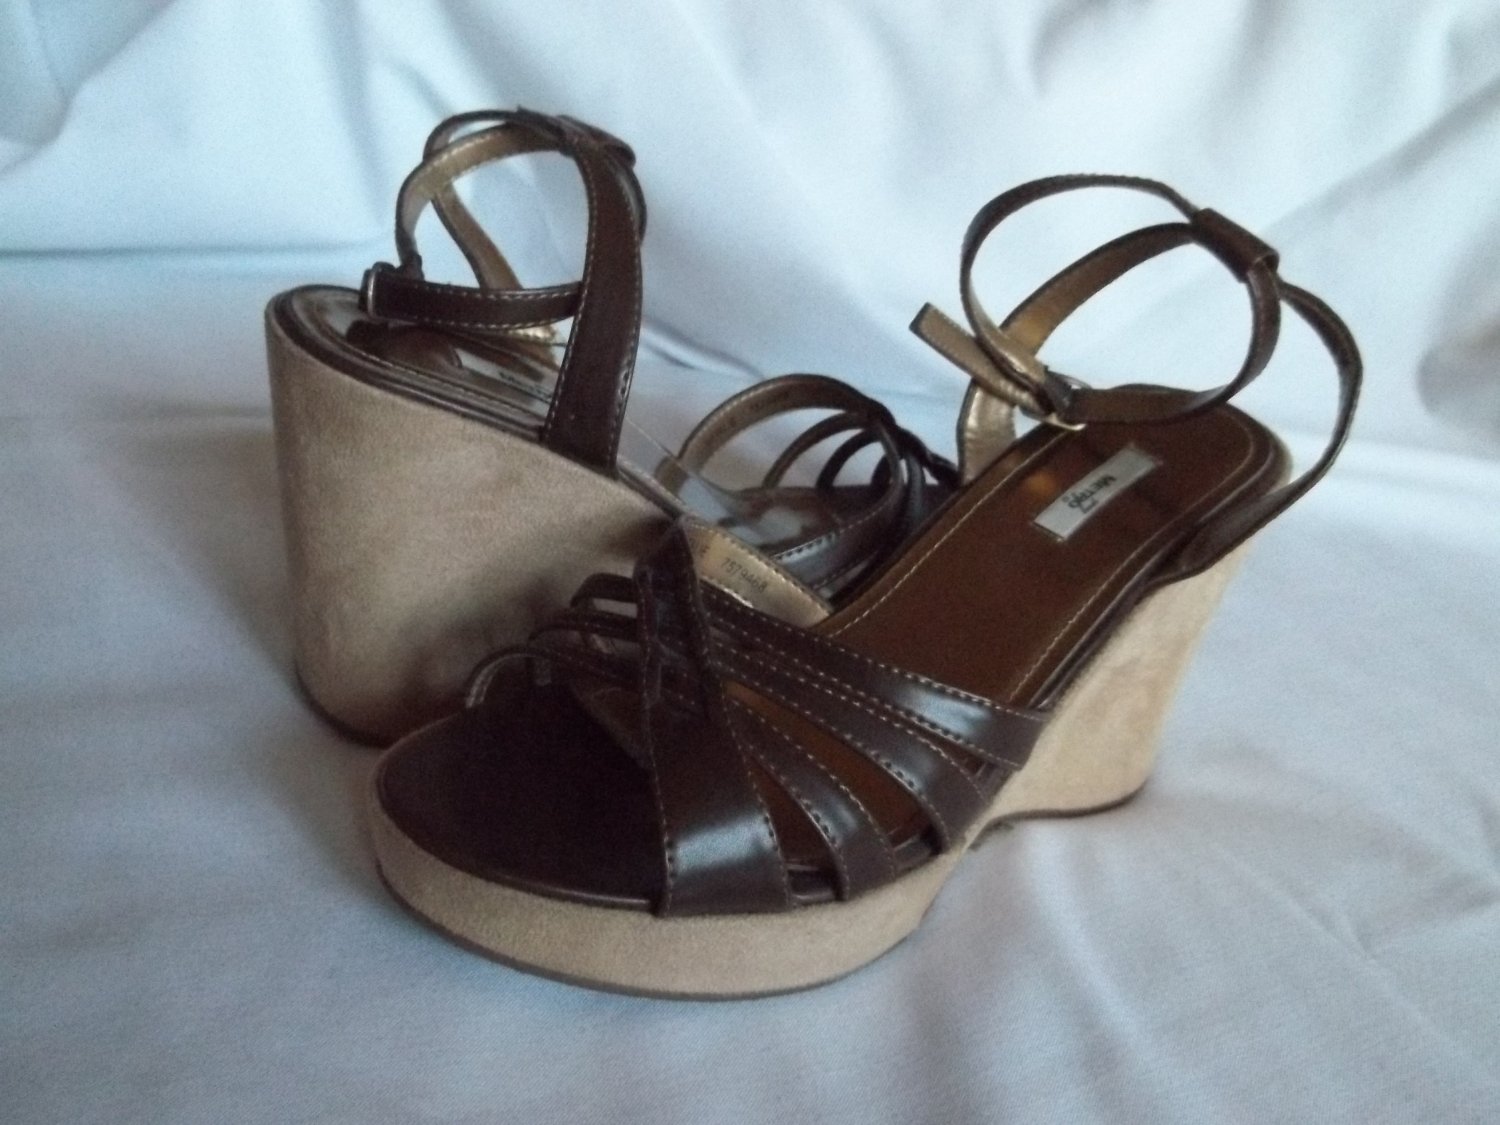 brown wedge sandals size 5